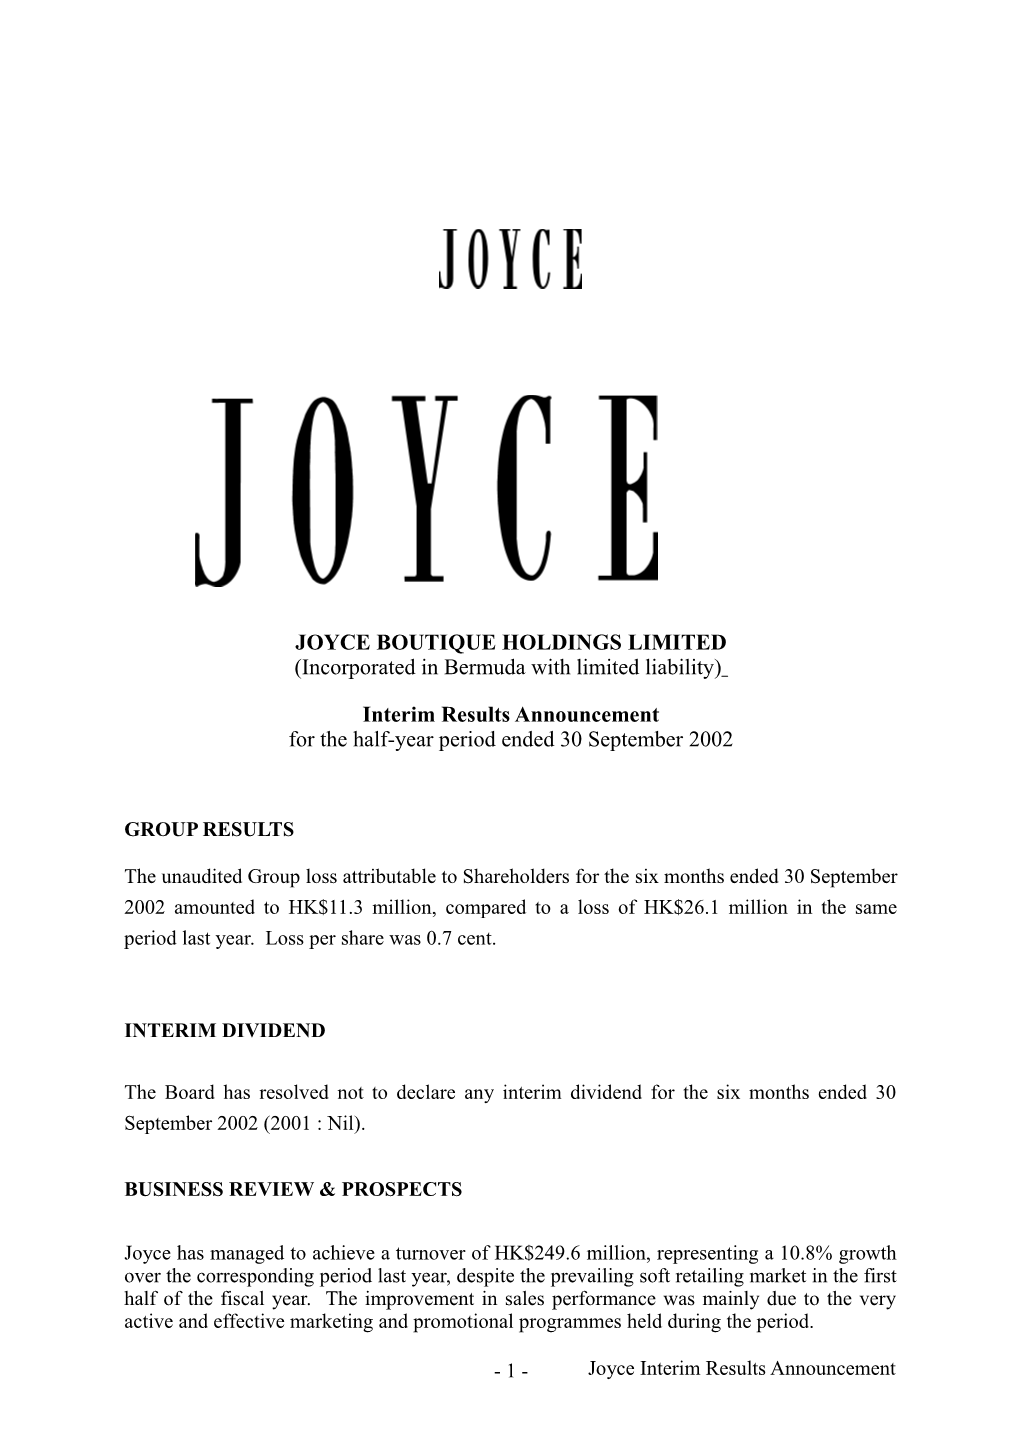 Joyce Boutique Holdings Limited